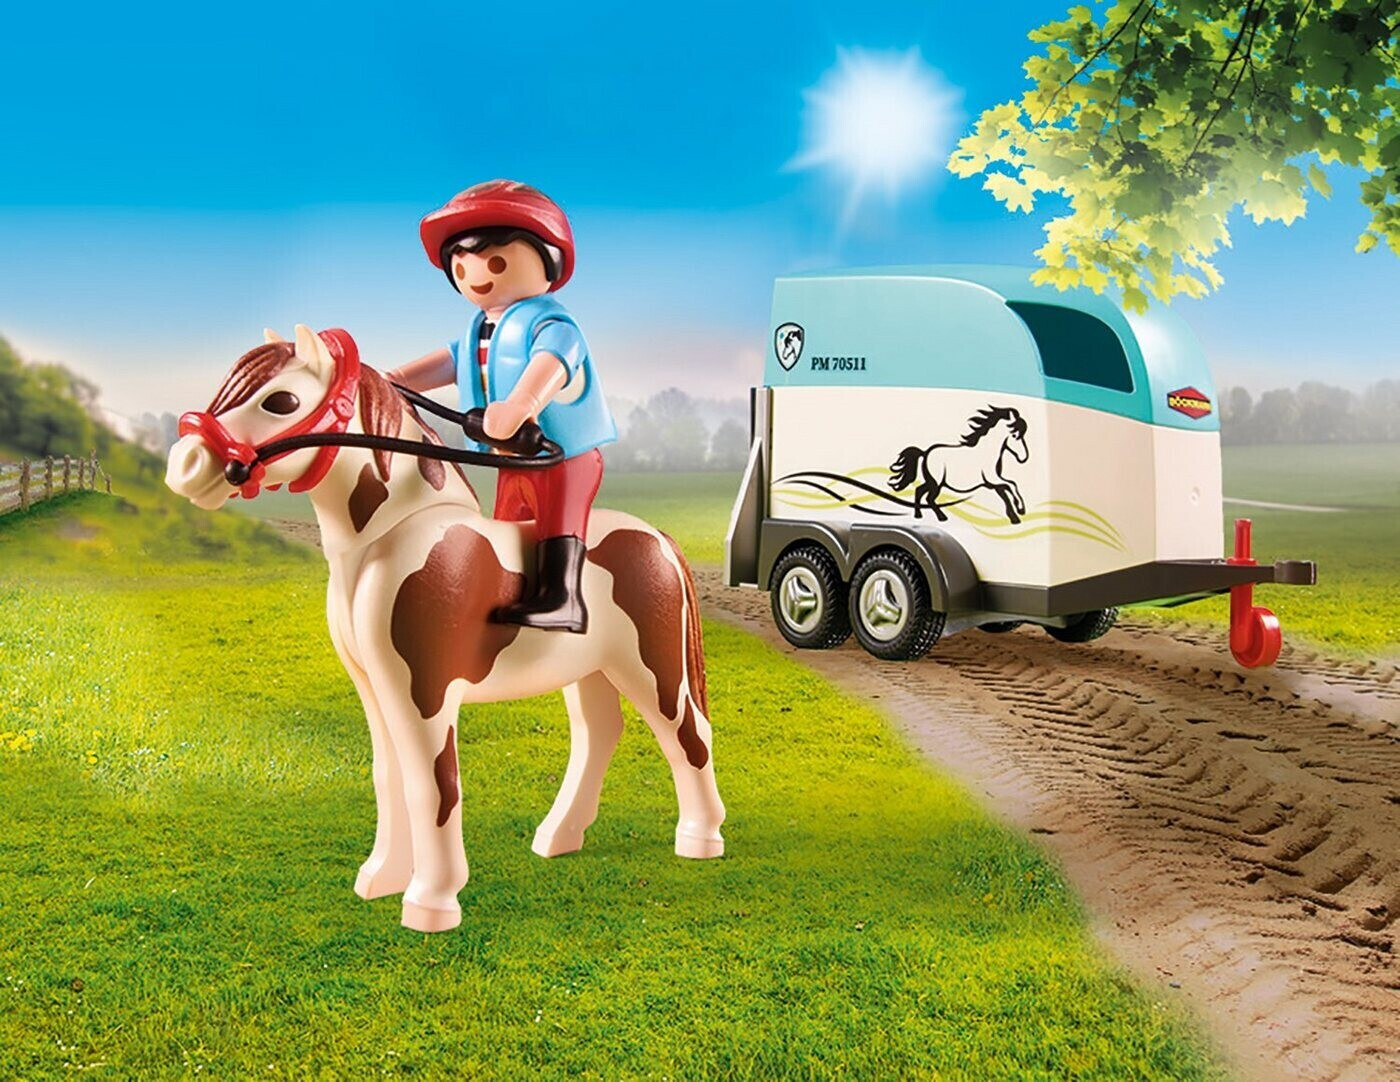 Buy Playmobil 70511 from £37.76 (Today) – Best Deals on